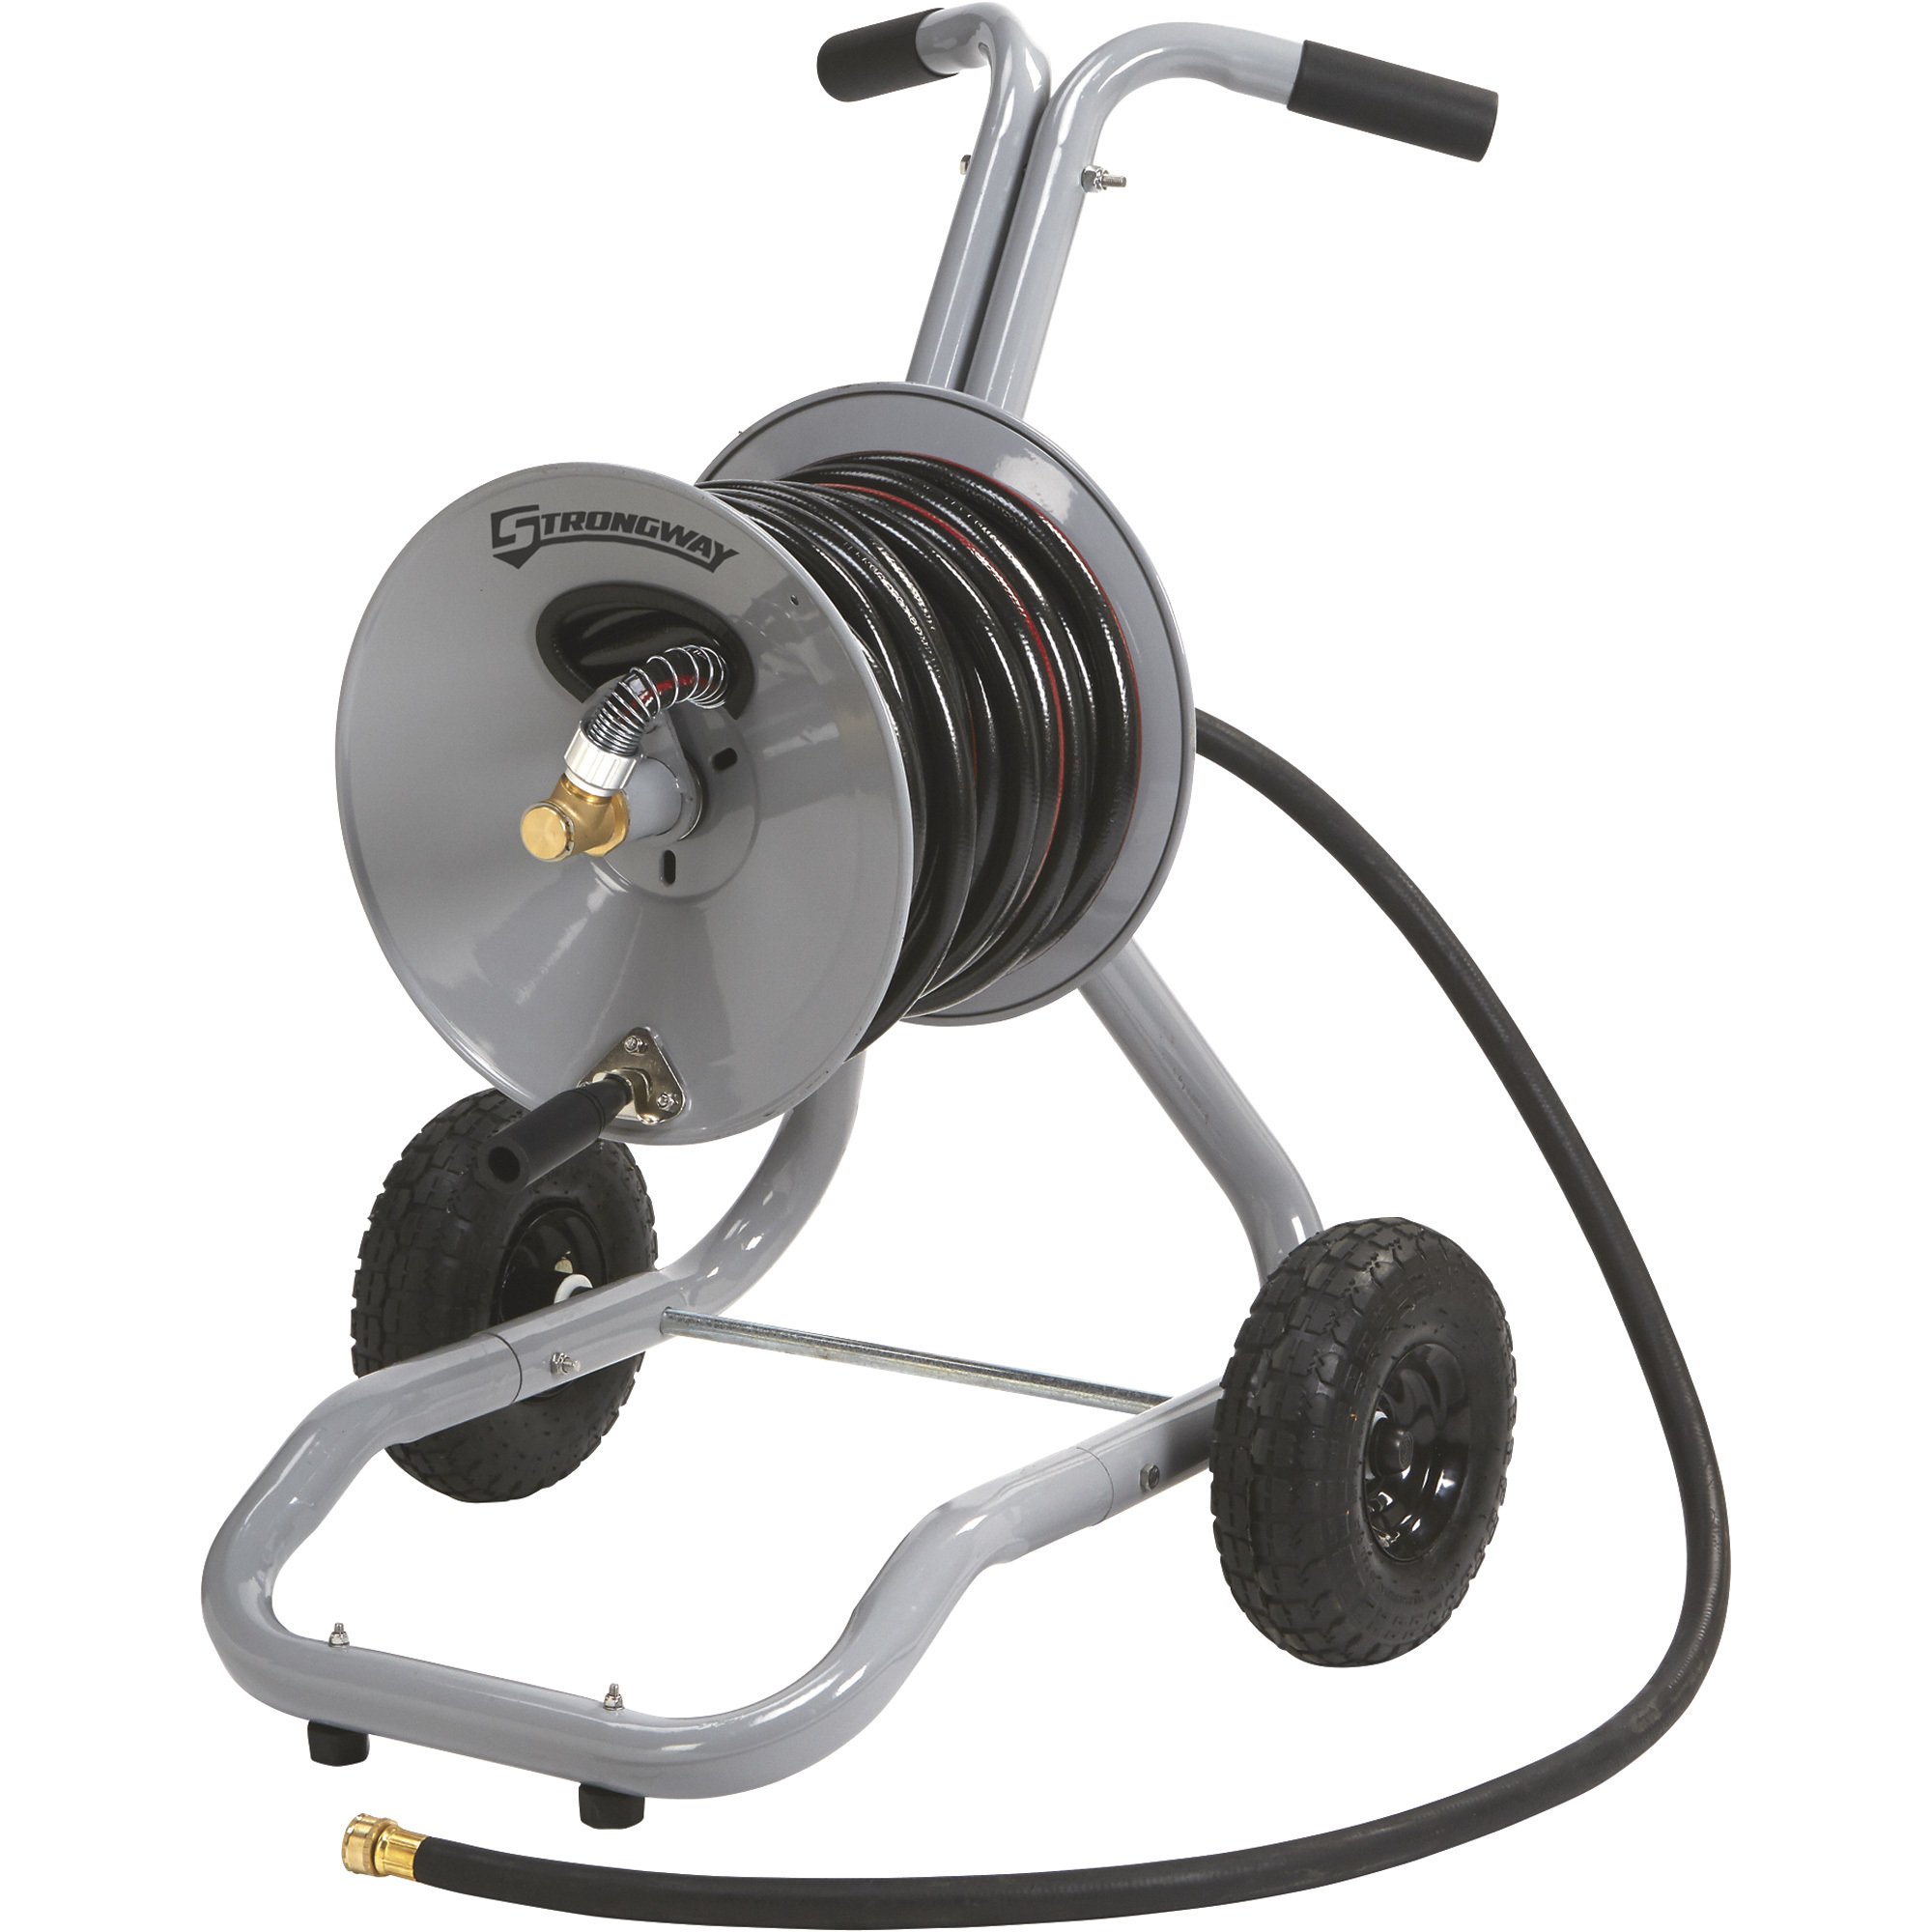  Ironton Steel Hose Reel Yard and Garden Cart, Holds up to  5/8in. x 300ft. Garden Hose, Easy-Rolling 10in. Pneumatic Tires : Ironton:  Patio, Lawn & Garden